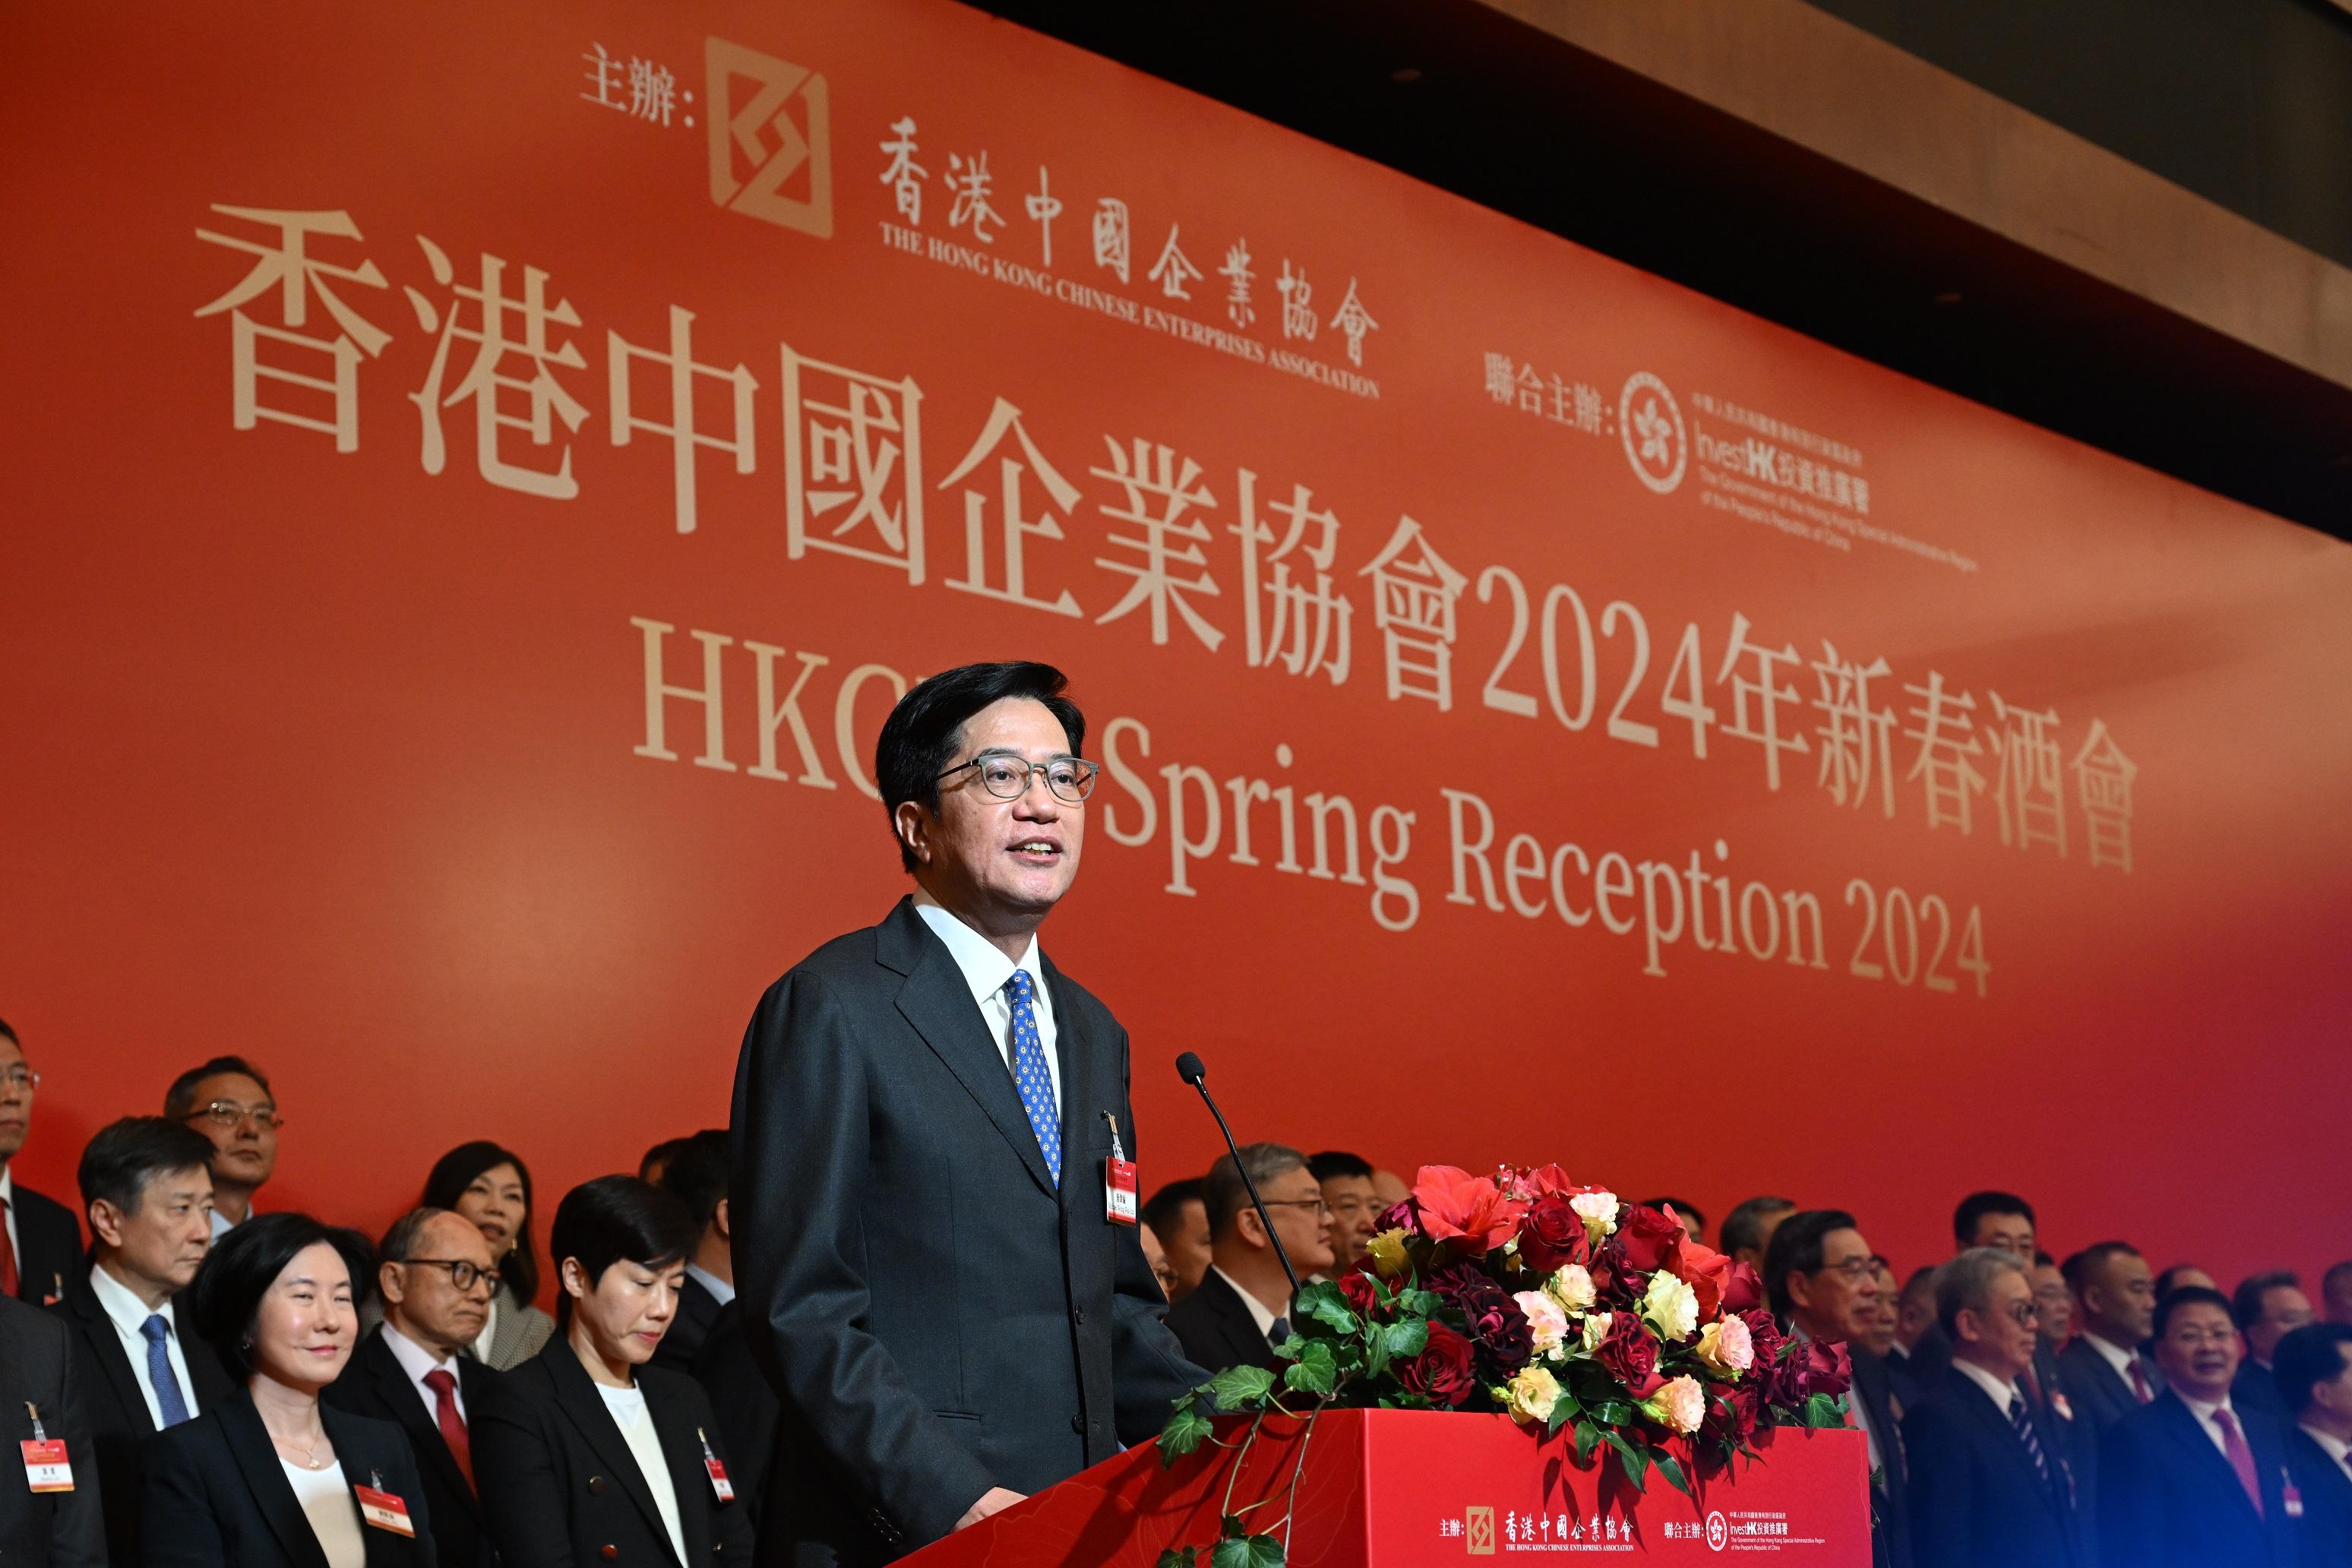 Invest Hong Kong (InvestHK) and the Hong Kong Chinese Enterprises Association collaborated a spring reception this evening (February 26), receiving representatives from major Mainland enterprises in recognition of their lasting commitment and contributions to the city. Photo shows the Deputy Financial Secretary, Mr Michael Wong, addressing the guests at the reception.